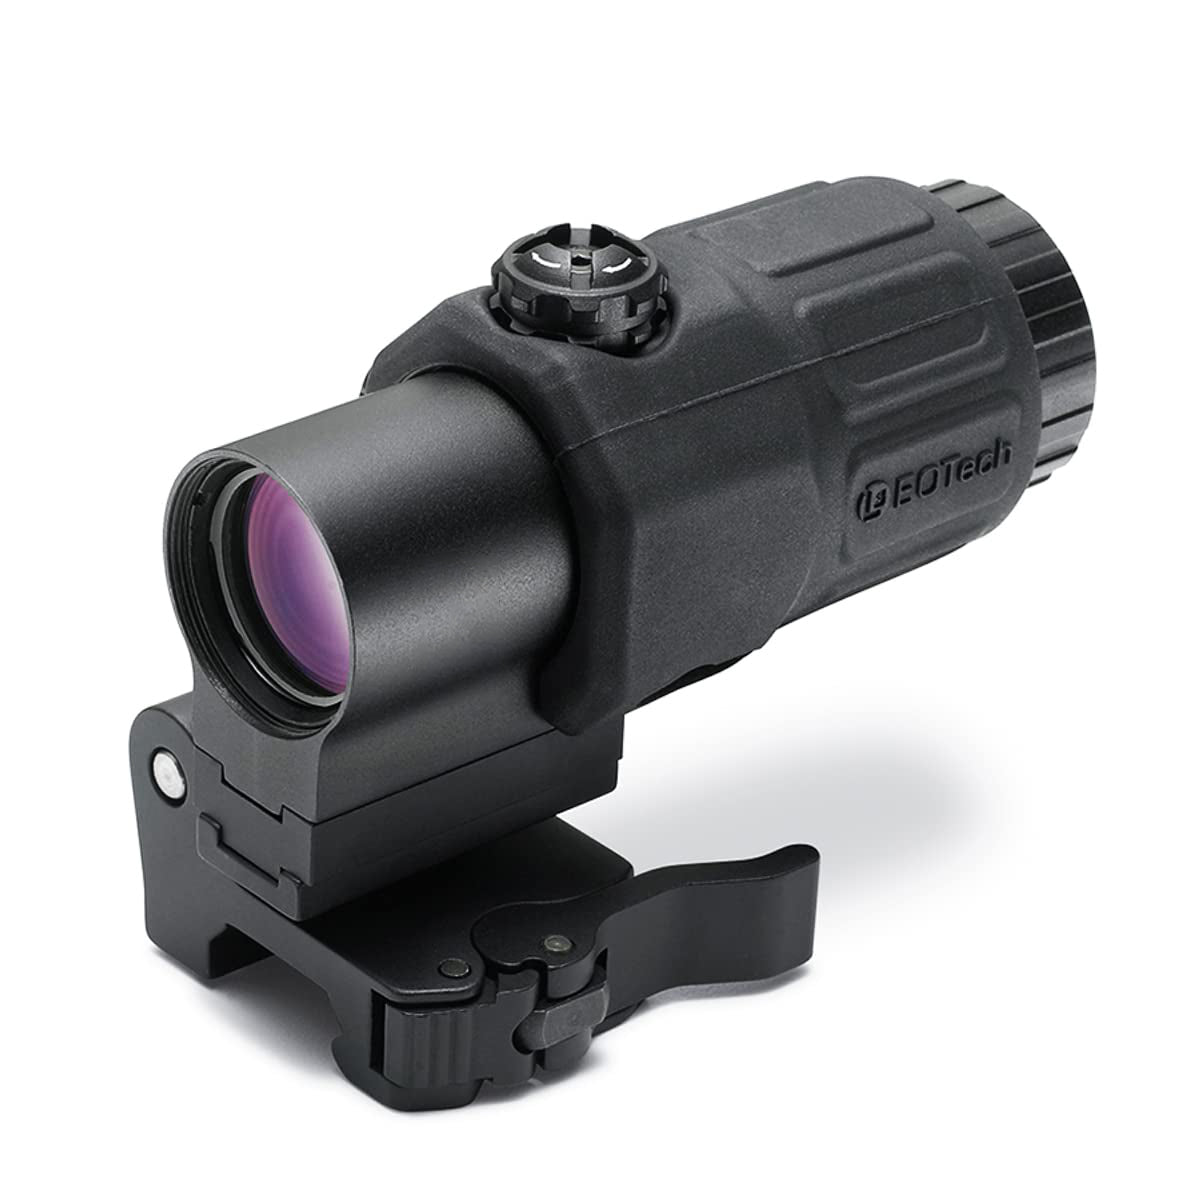 G33 3X Magnifier with STS Mount